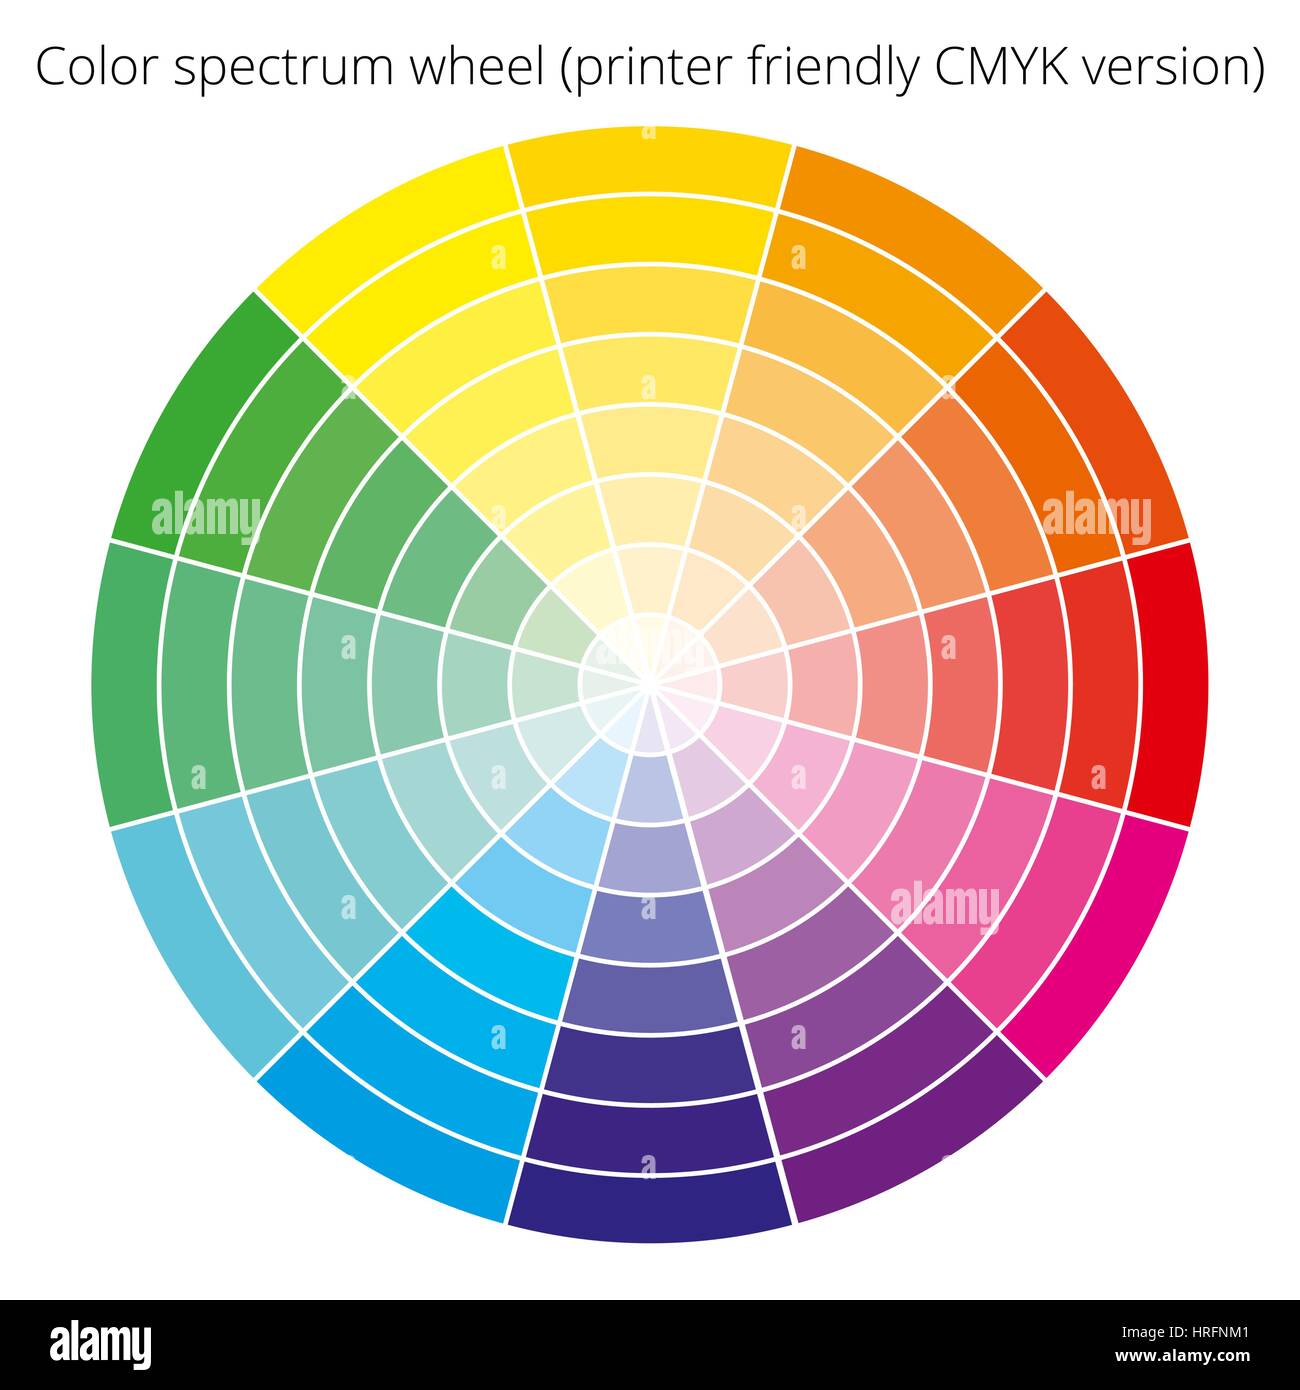 photoshop create color palette from image cmyk